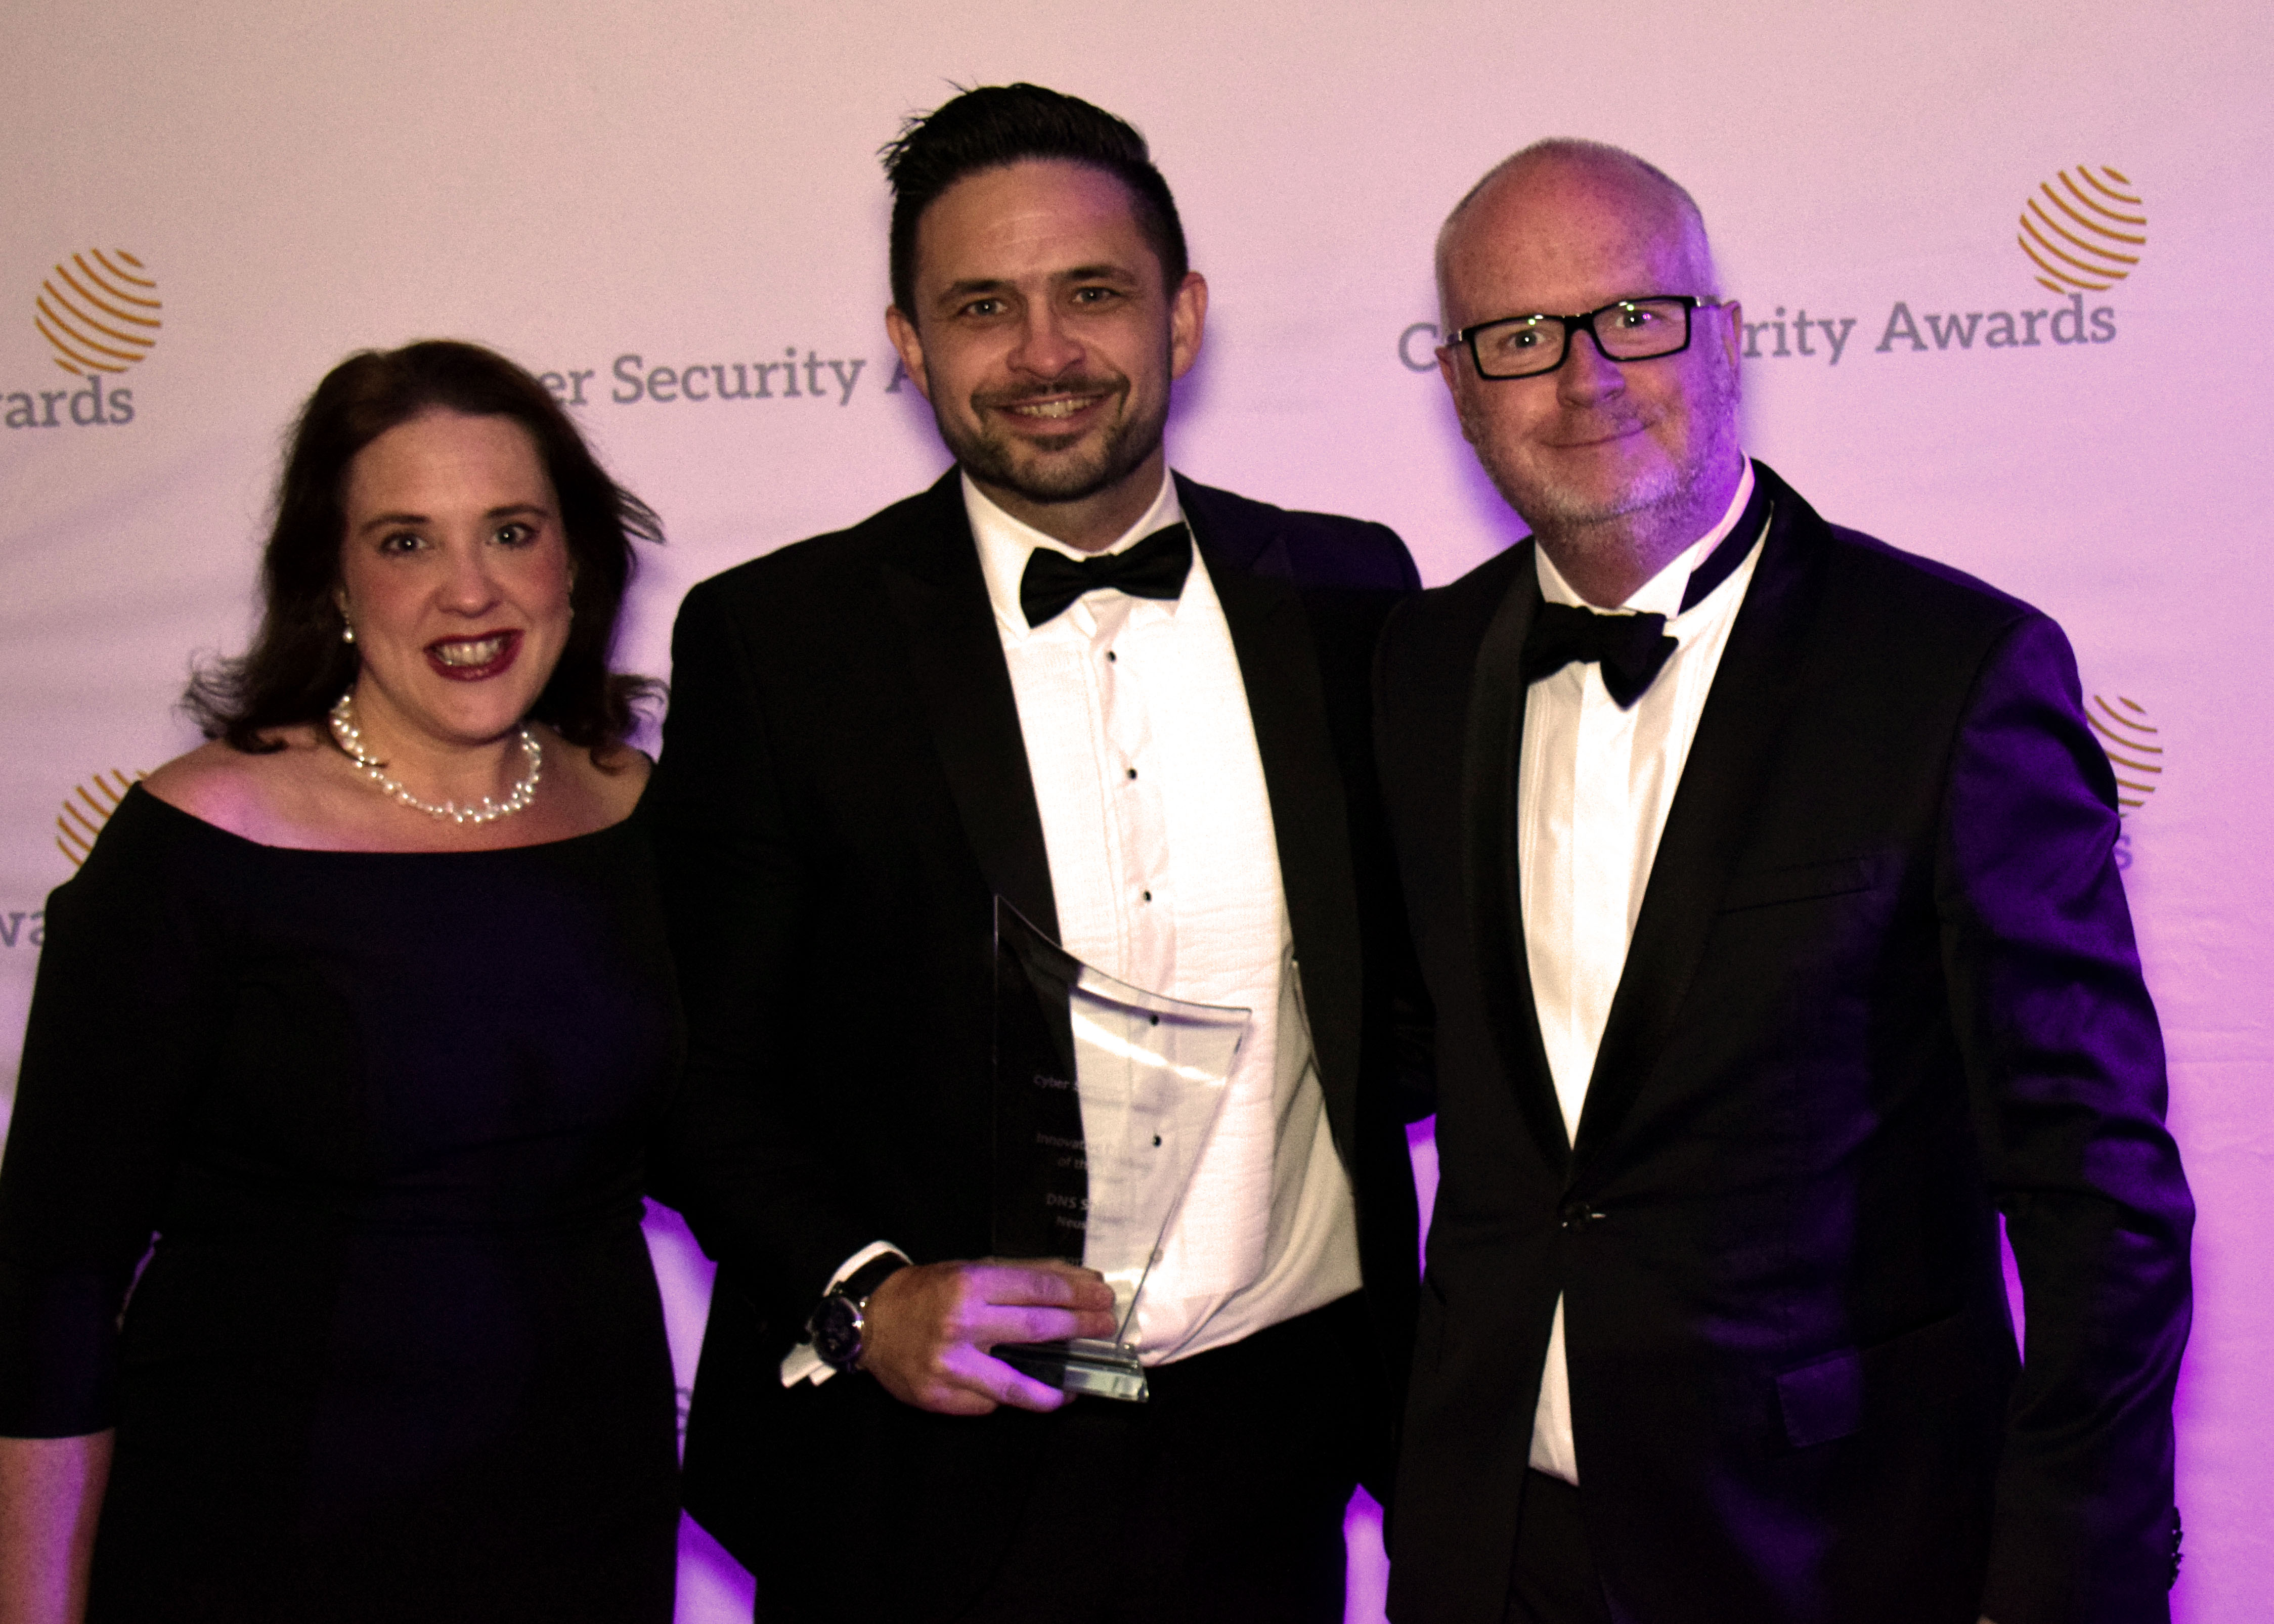 2017 Cyber Security Awards